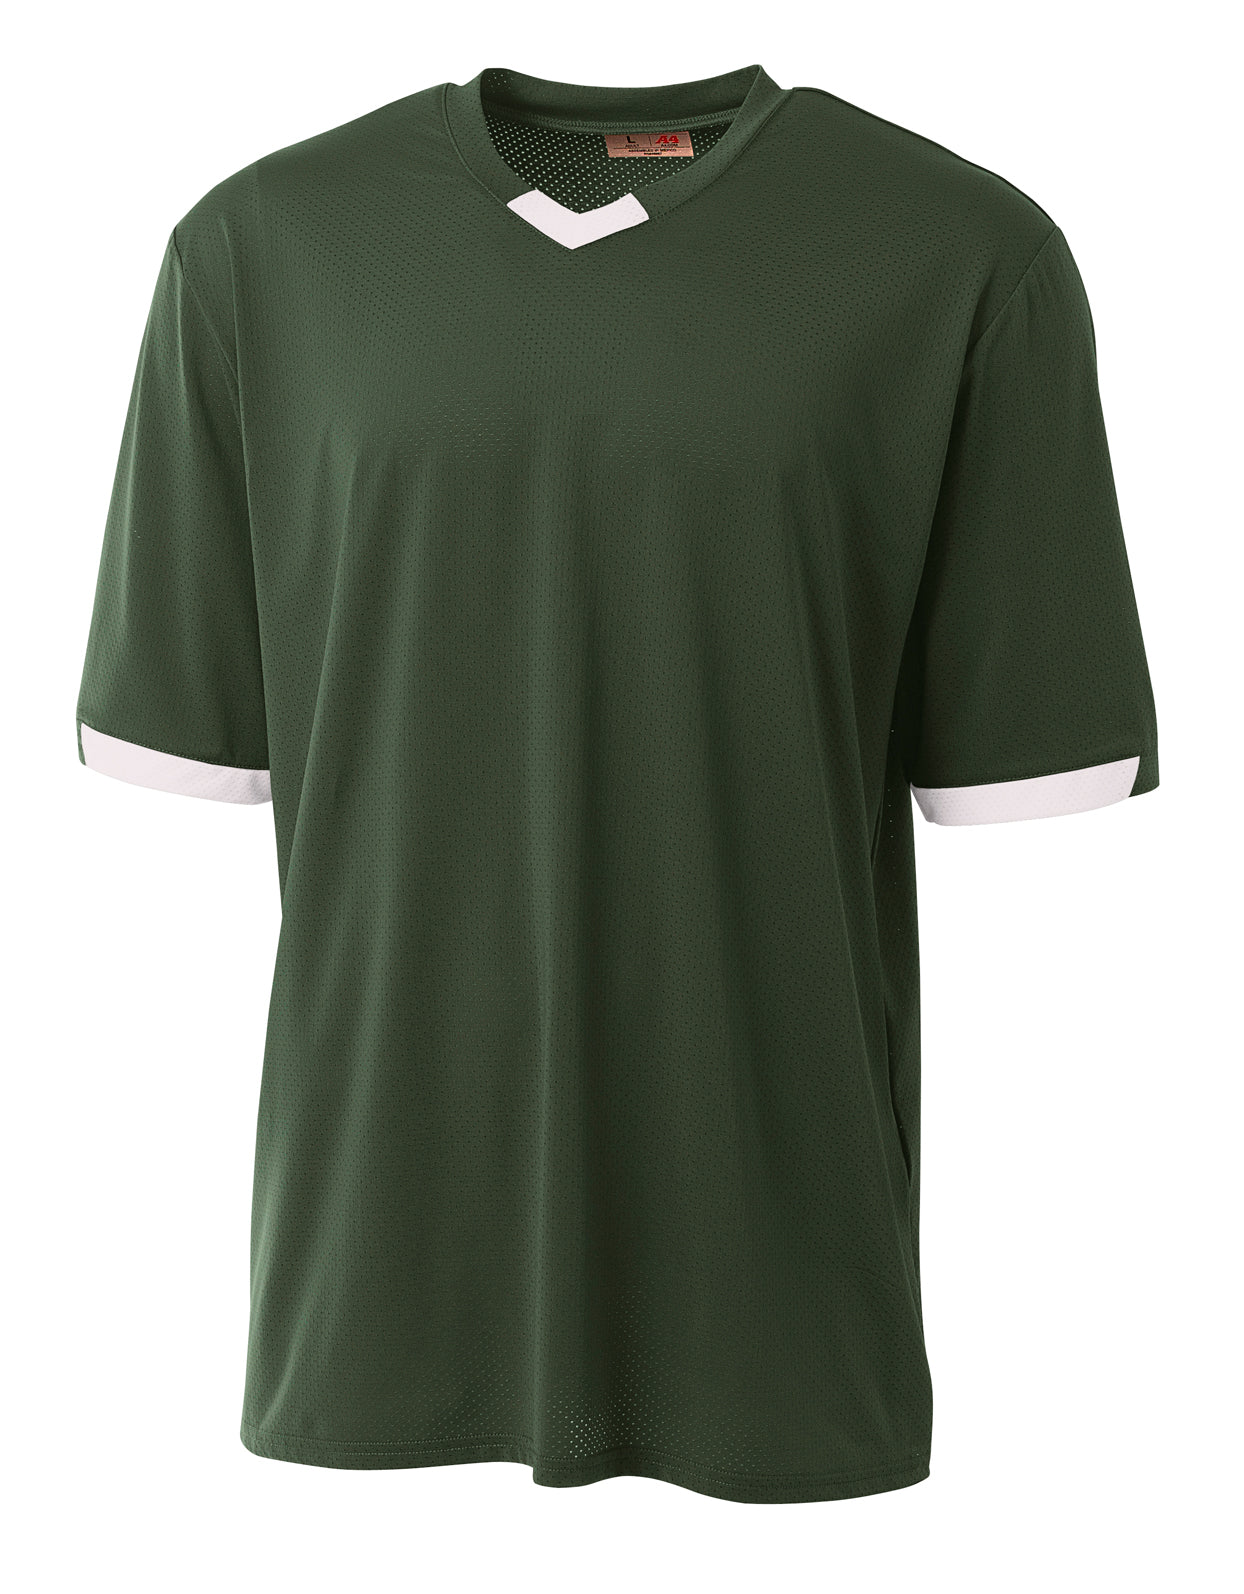 Forest/white A4 A4  Youth Stretch Pro Baseball Jersey